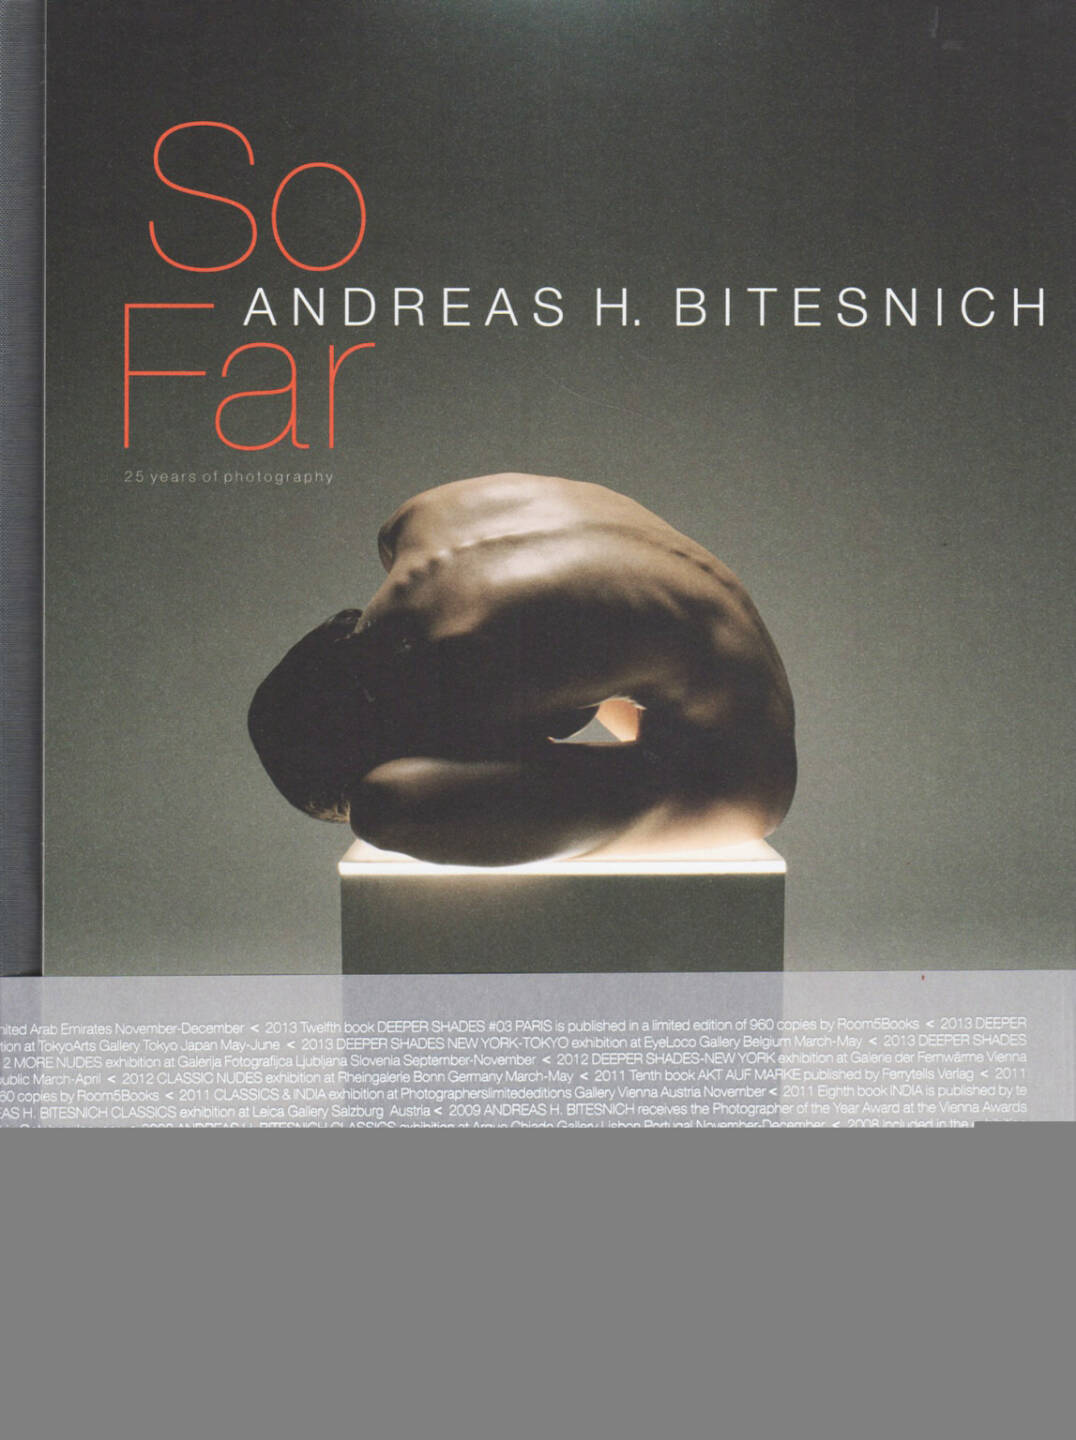 Andreas H. Bitesnich - So far - 25 years of photography, Room5Books 2014, Cover - http://josefchladek.com/book/andreas_bitesnich_-_so_far_-_25_years_of_photography